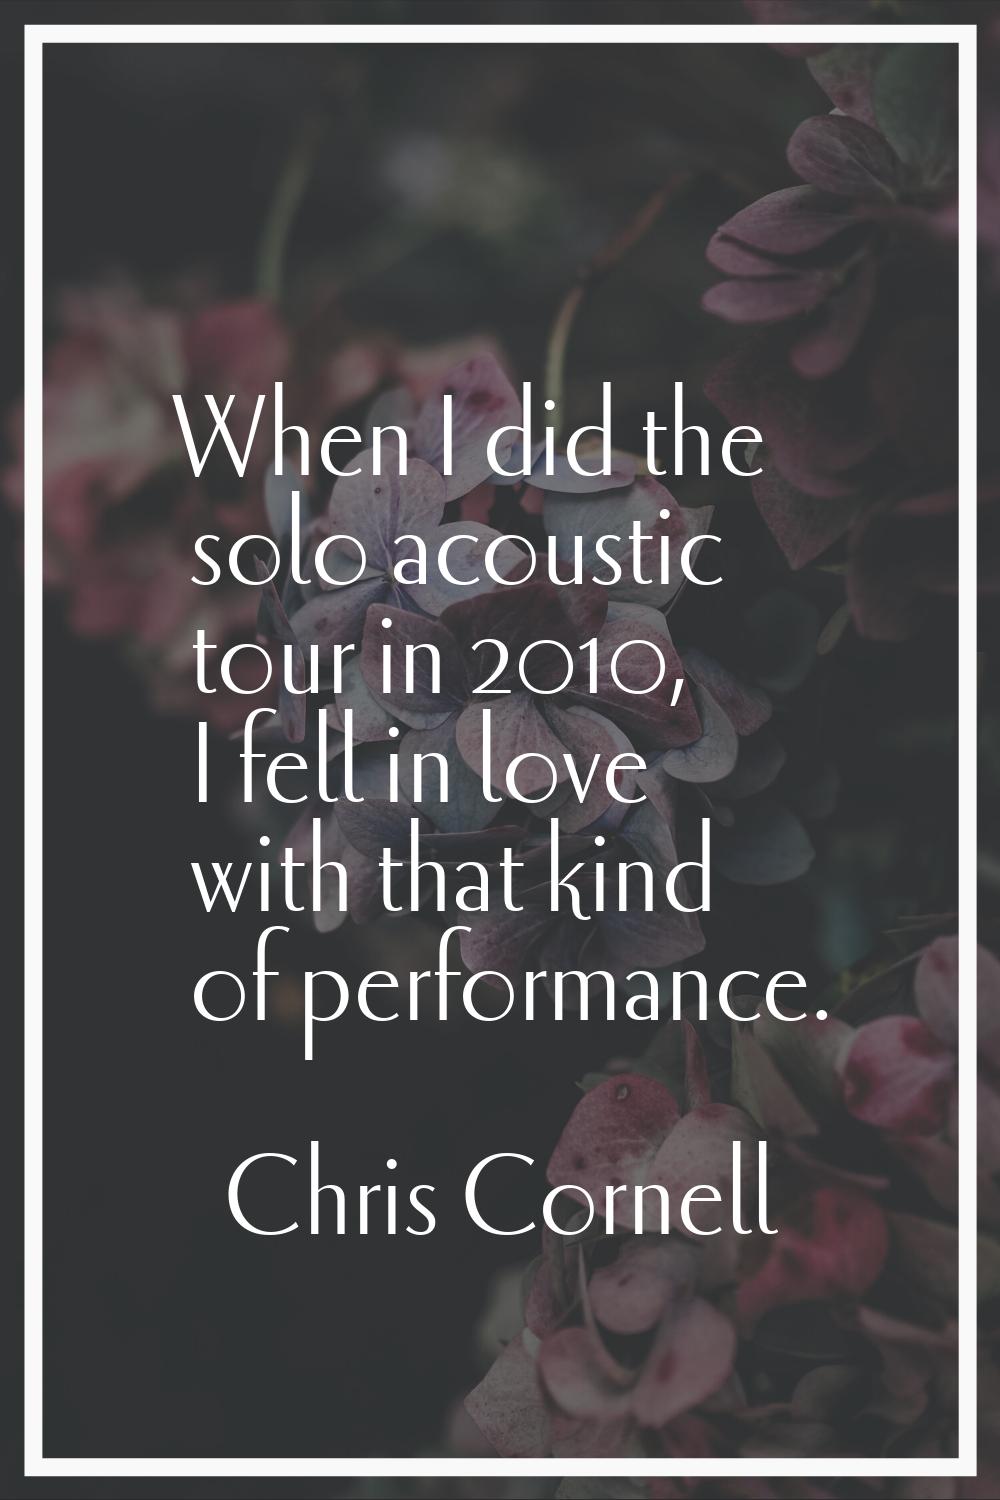 When I did the solo acoustic tour in 2010, I fell in love with that kind of performance.